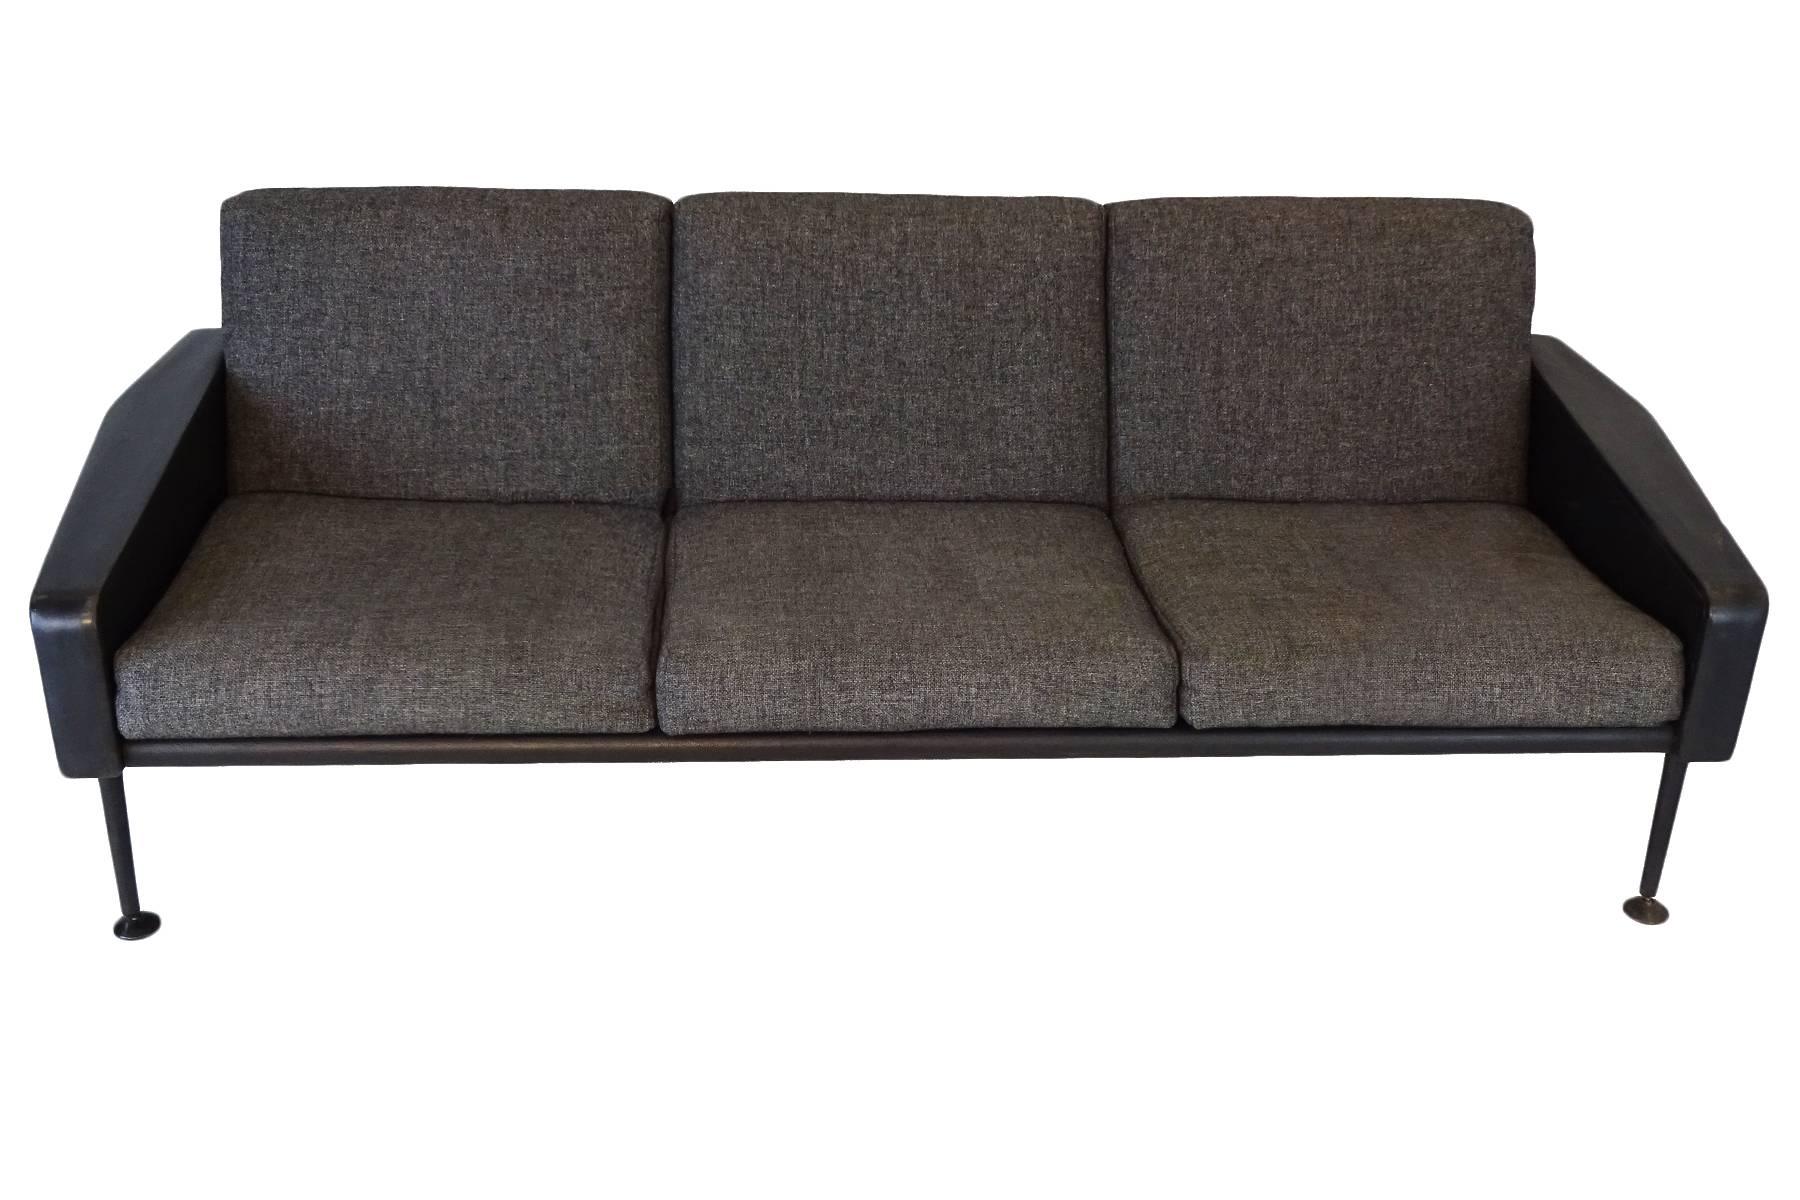 Ernest Race sofa in black leather and grey Irish tweed fabric that is excellent vintage condition save a few small scuffs to the leather here and there. The design dates back to the late 1950s and this sofa was produced in 1965. Apparently this was